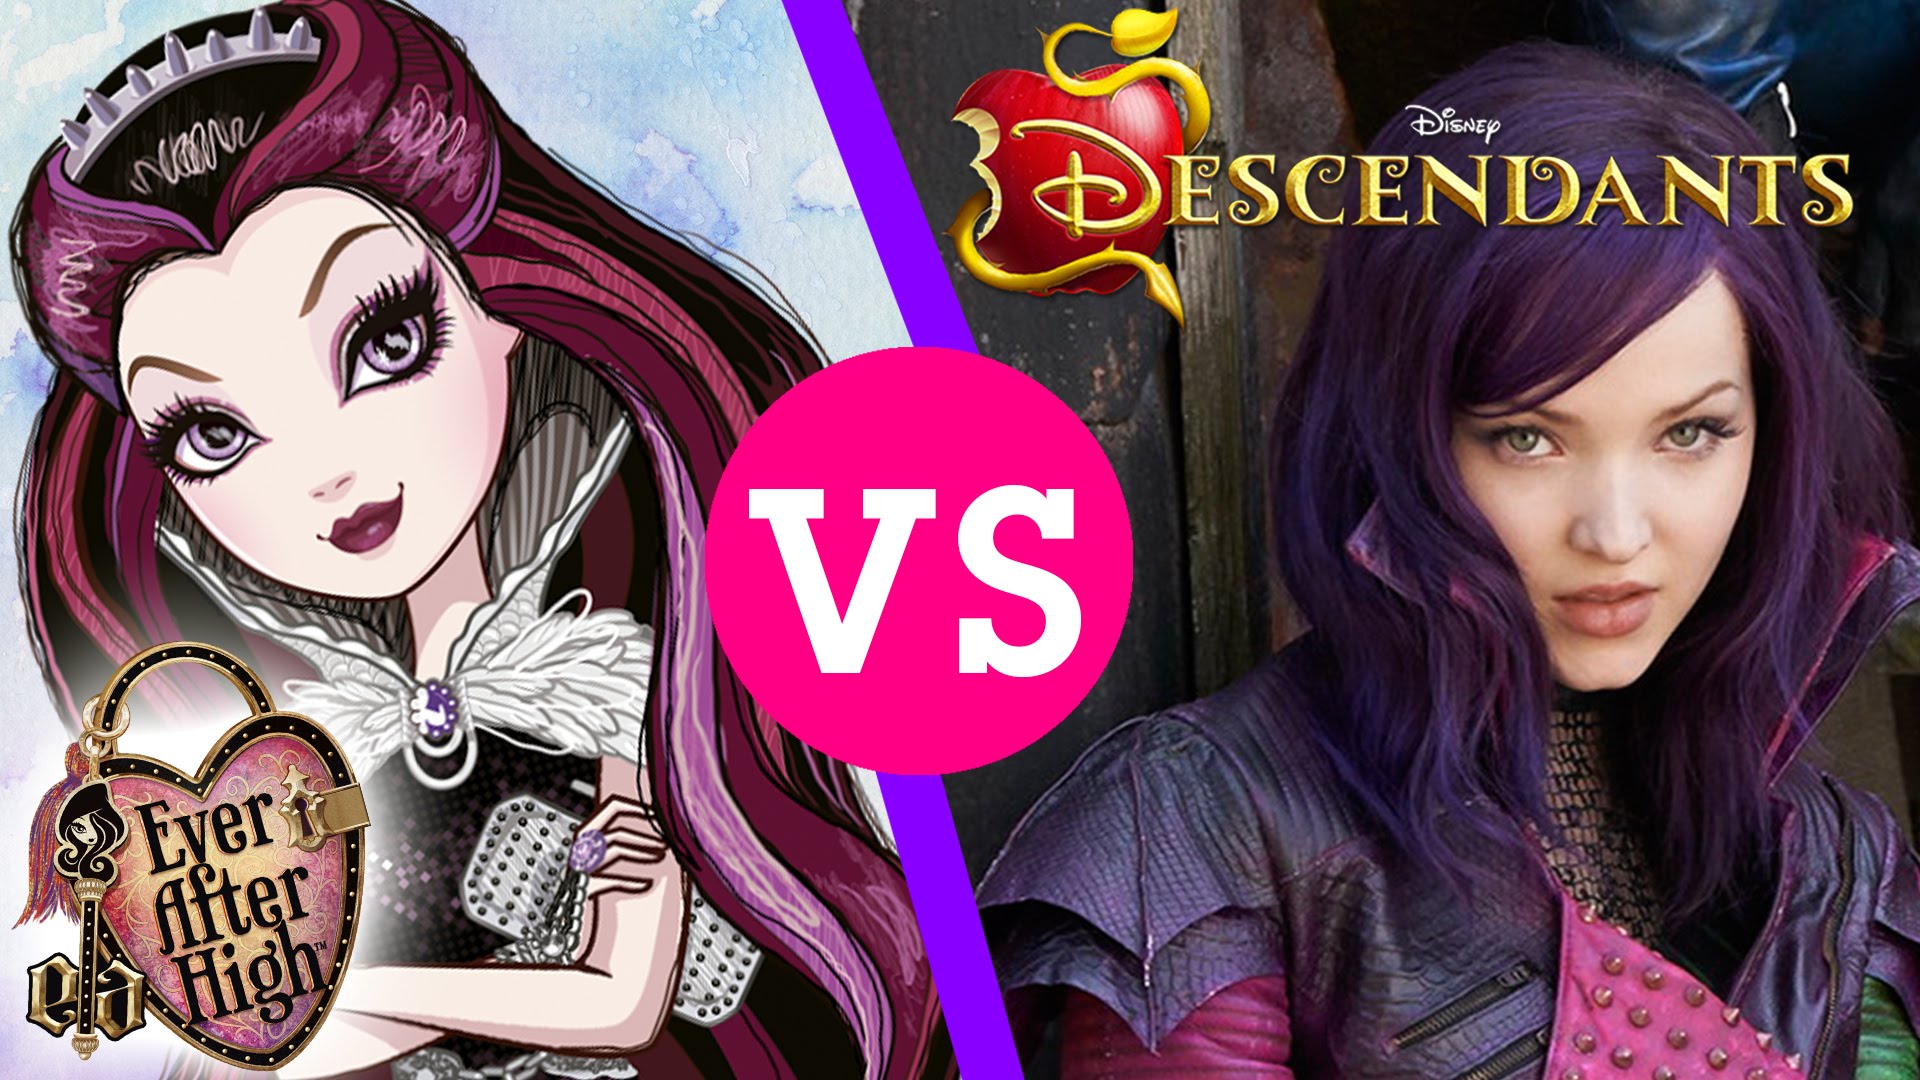 Disney's Descendants vs. Ever After High | A Once Upon a Time ...